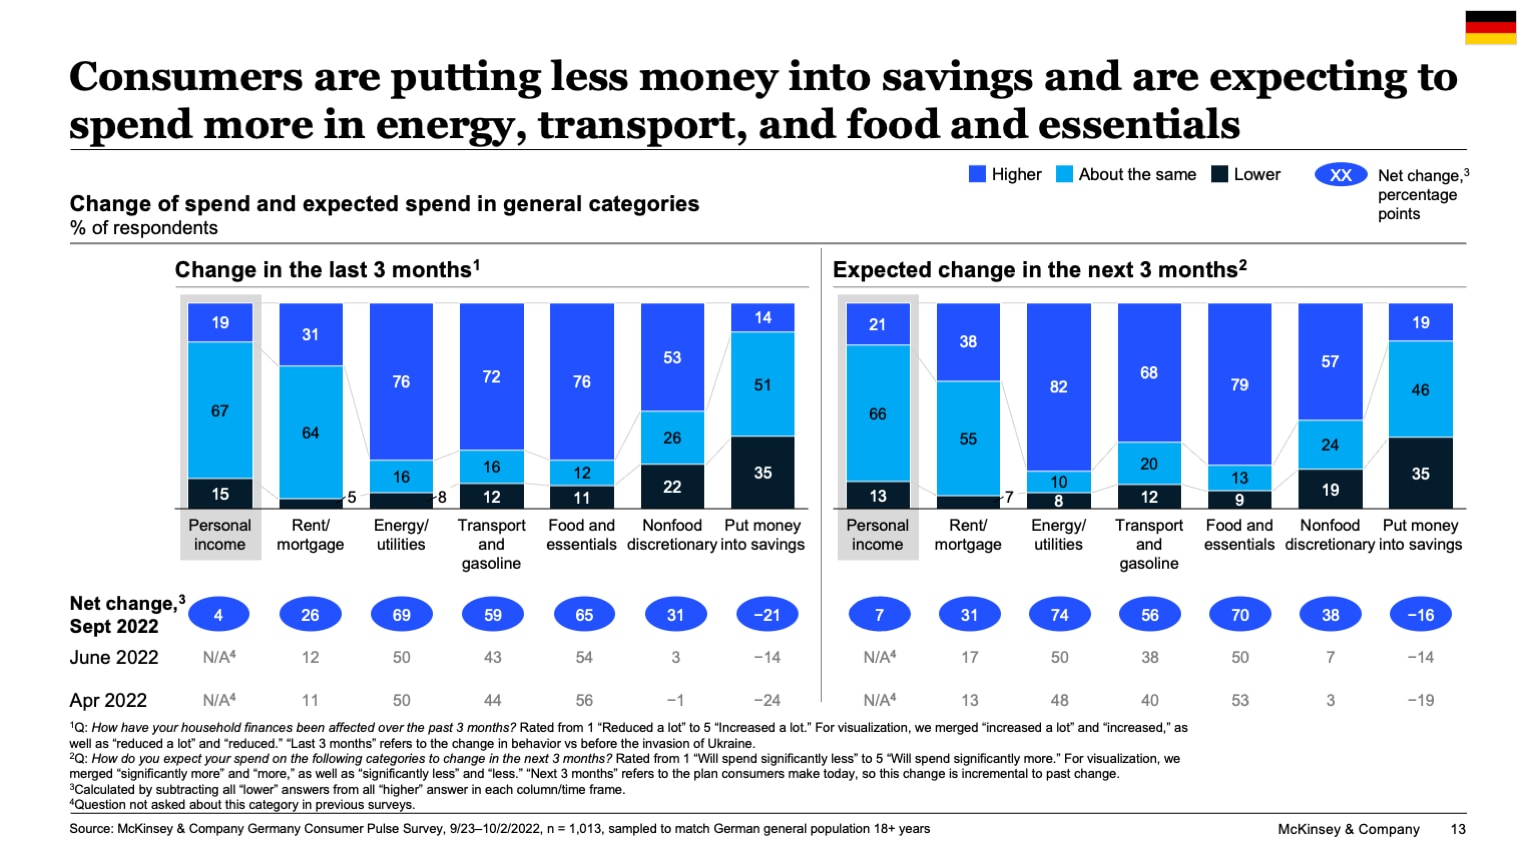 Consumers are putting less money into savings and are expecting to spend more in energy, transport, and food and essentials